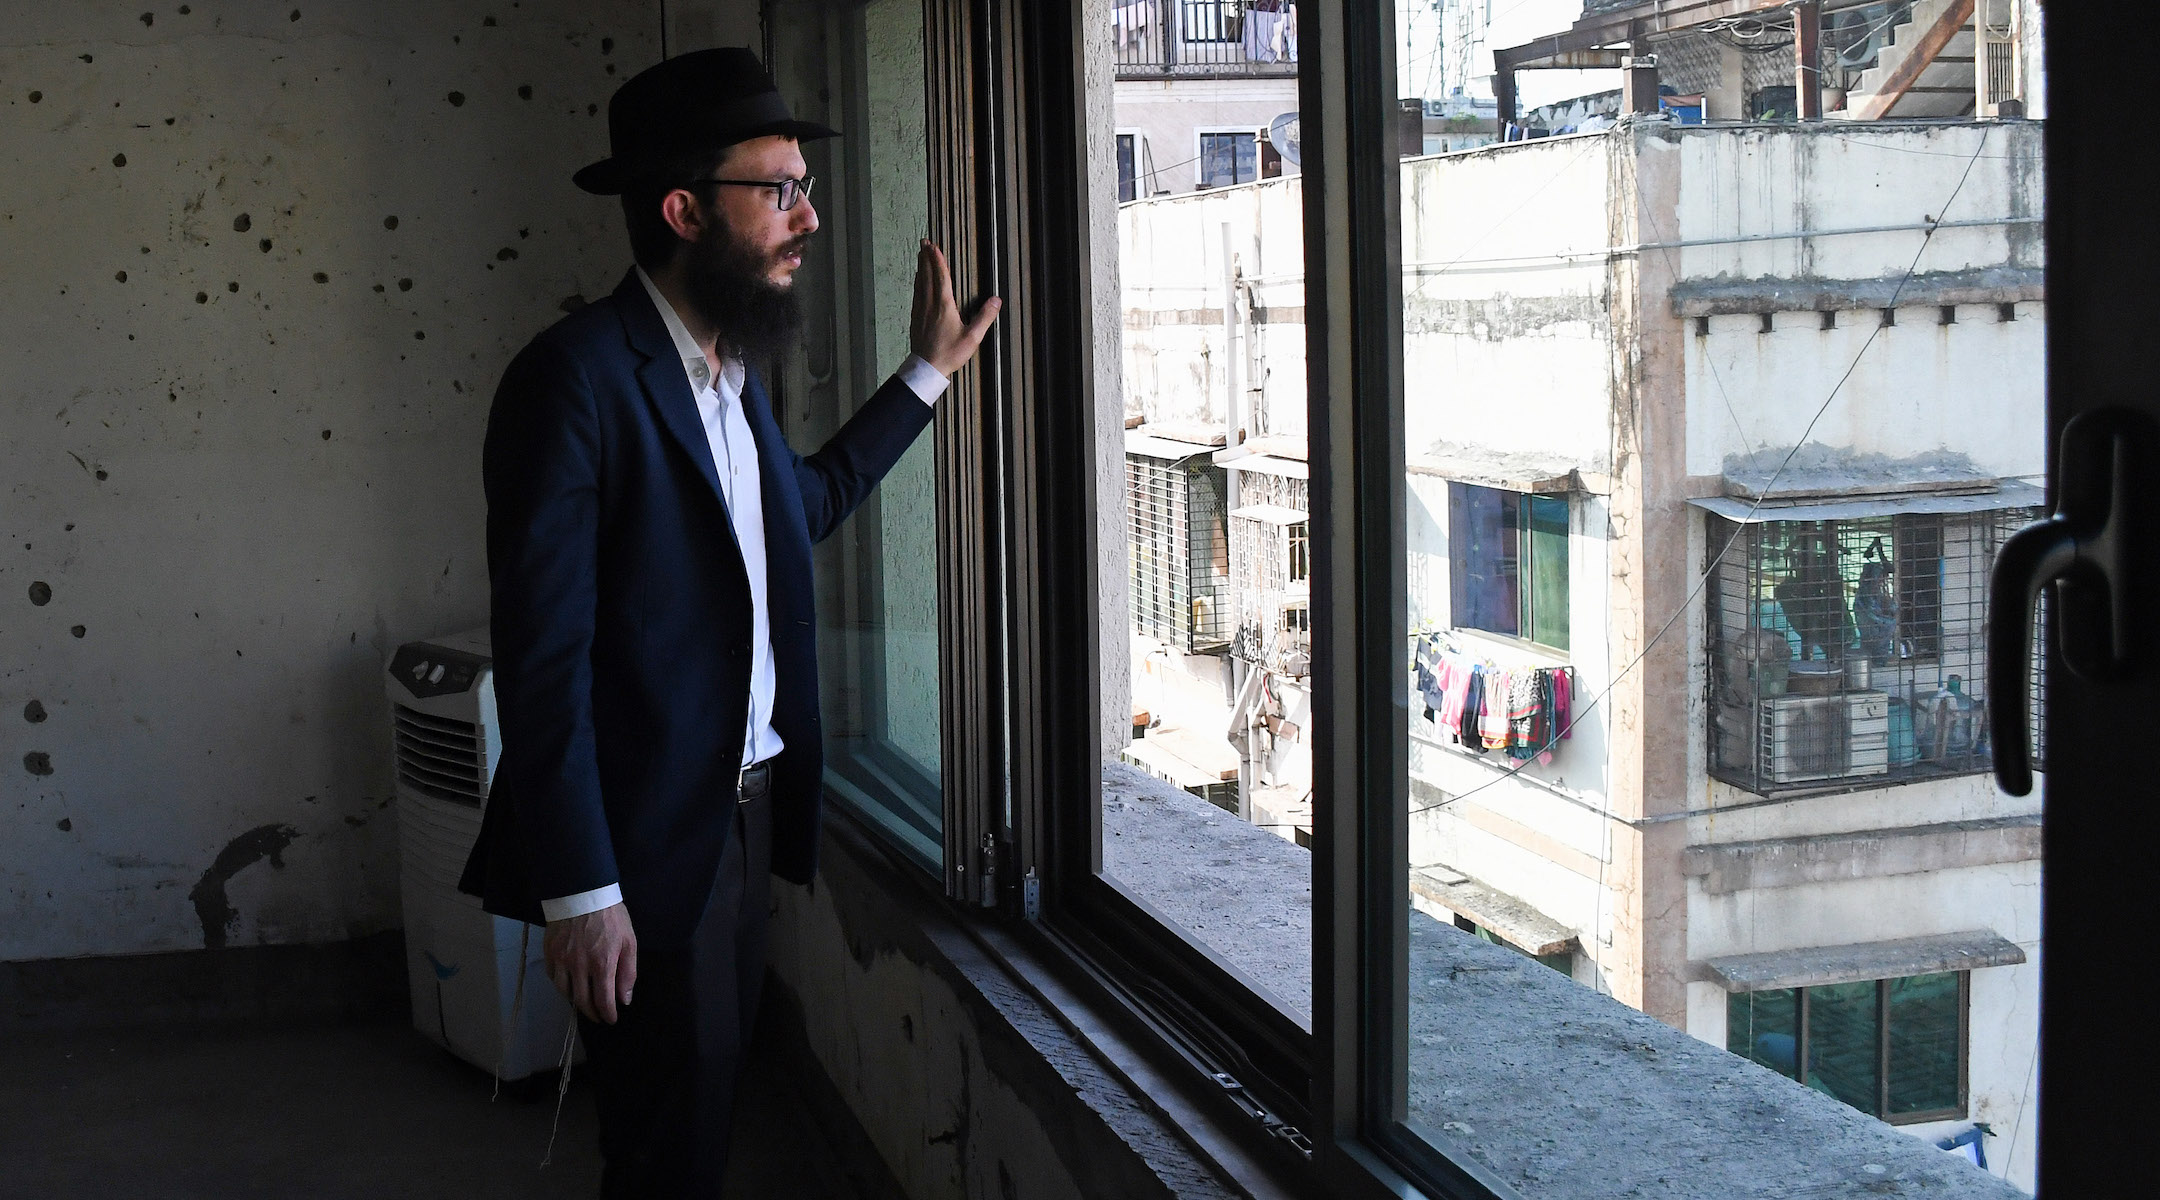 Rabbi Israel Kozlovsky, director of Mumbai’s Chabad center, looks out of a window of the center, in front of a wall pock-marked with bullet holes from the 2008 terror attack. (Ashish Vaishnav/SOPA Images/LightRocket via Getty Images)